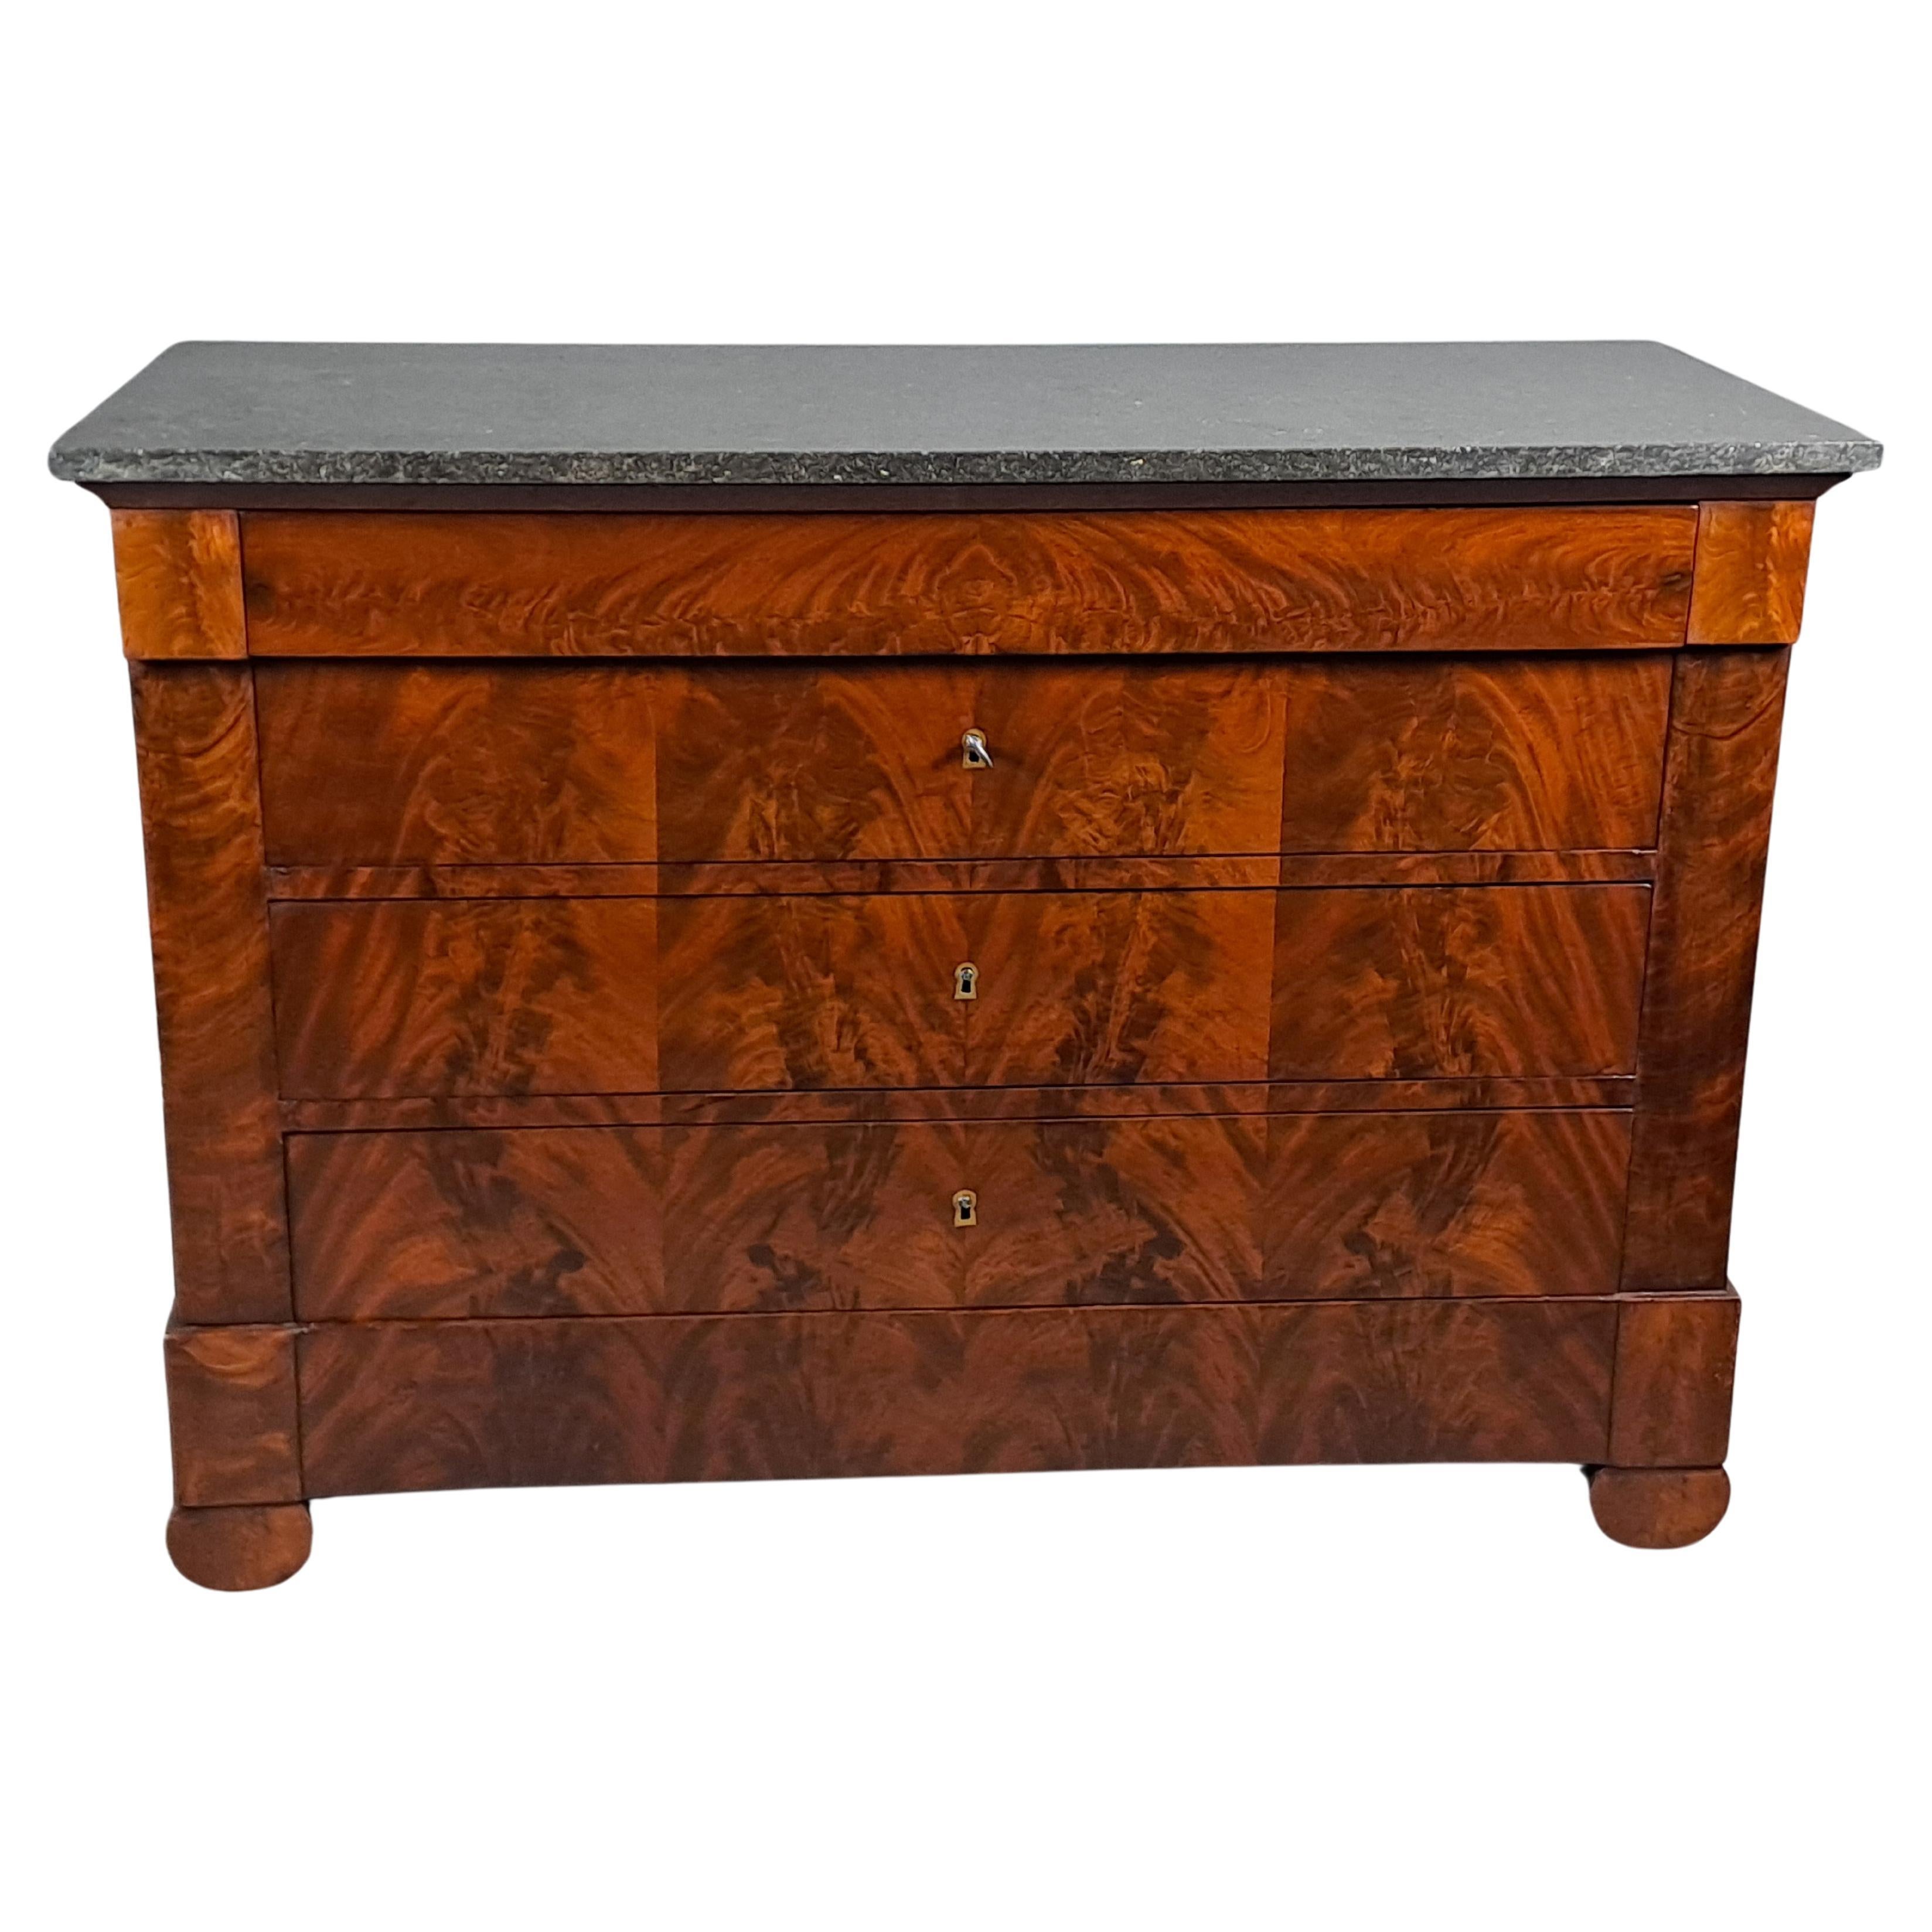 Restauration Period Commode In Flamed Mahogany For Sale